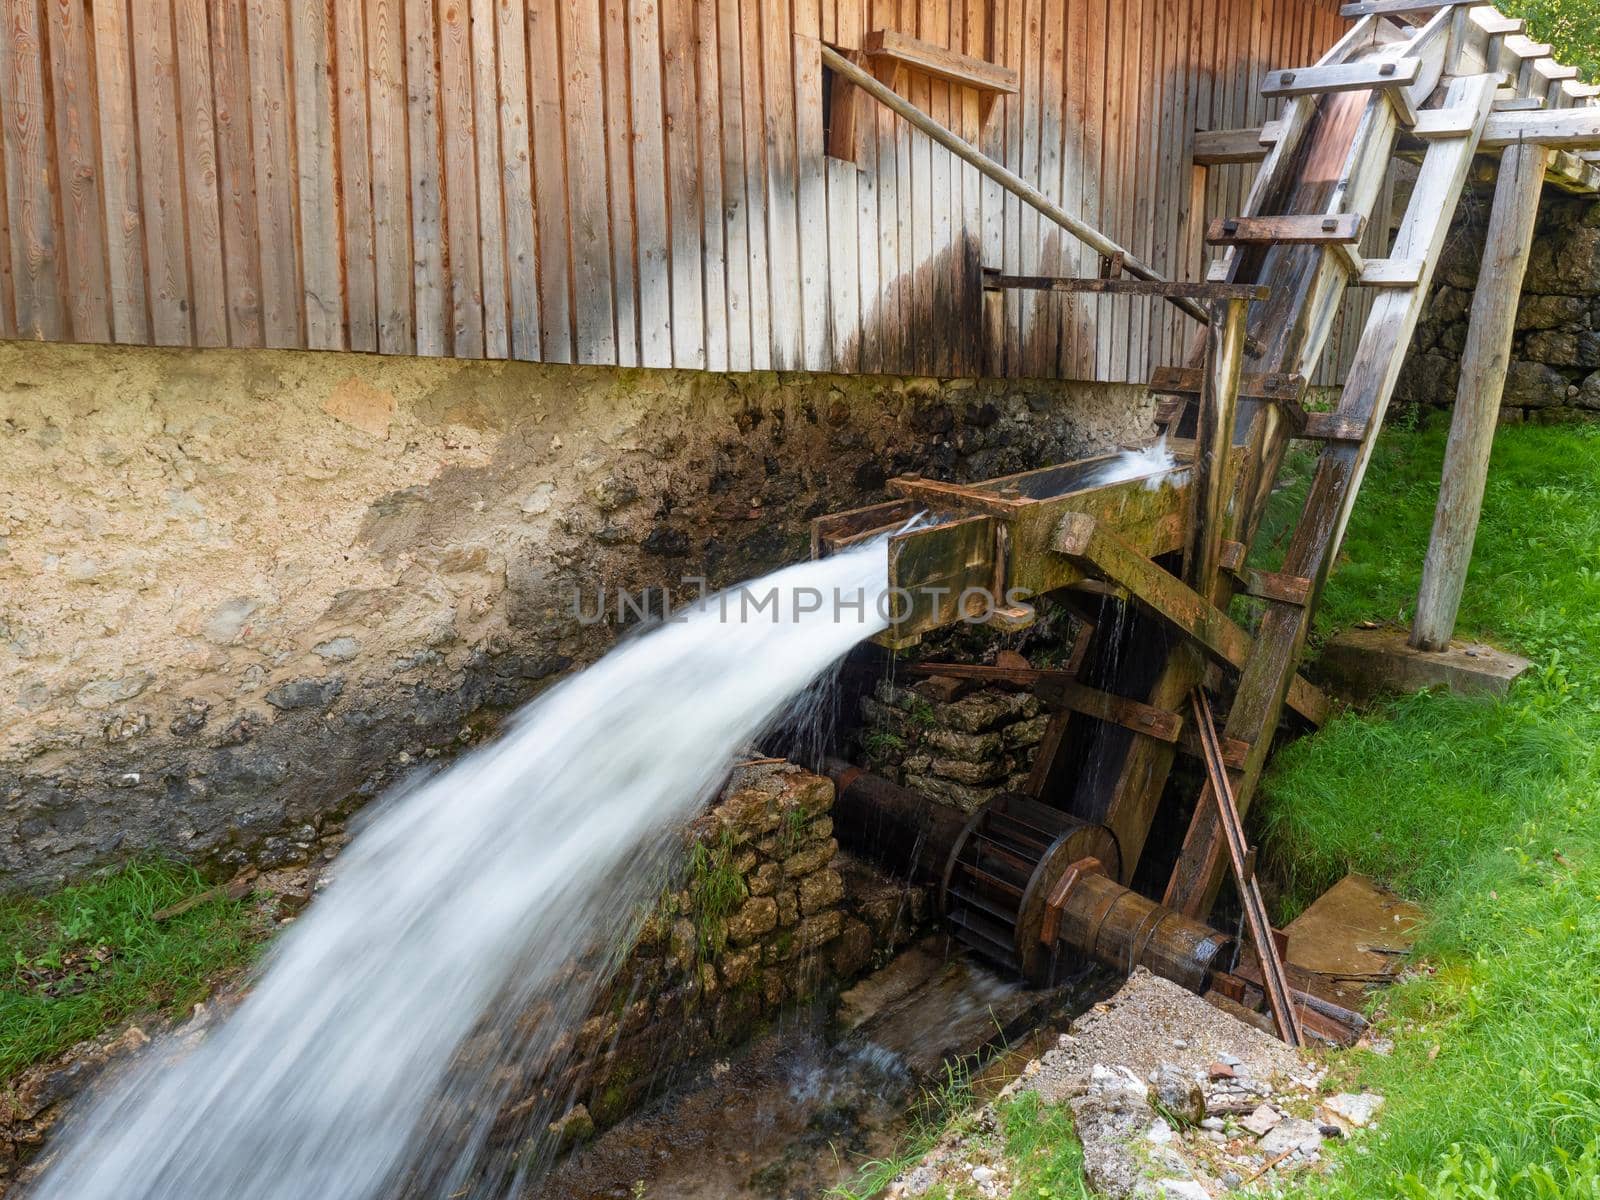 The power of the water spins the old watermill of a sawmill.  by rdonar2